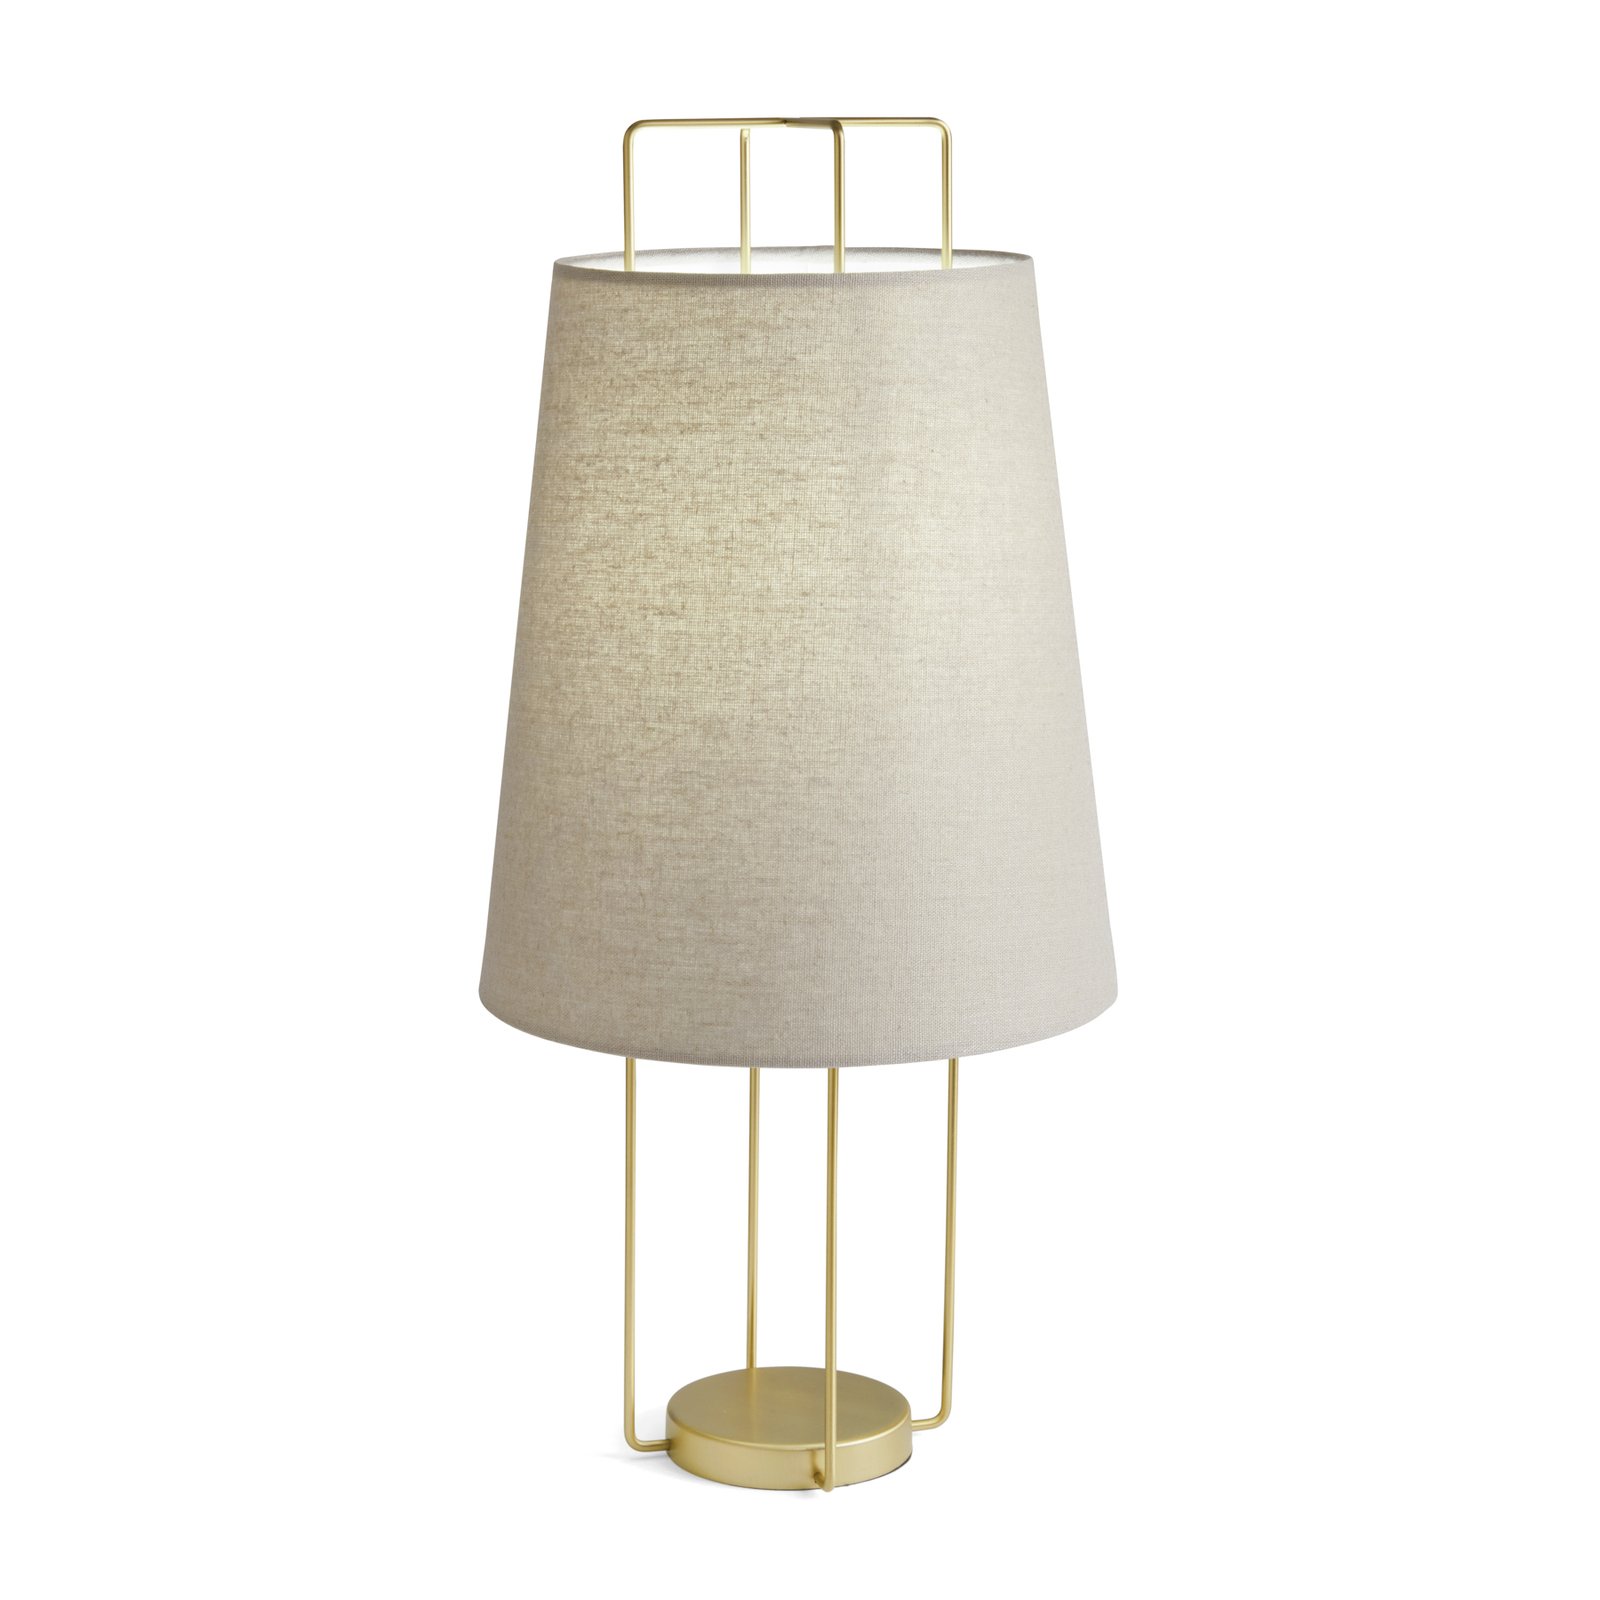 Pyra table lamp, sand-coloured fabric lampshade